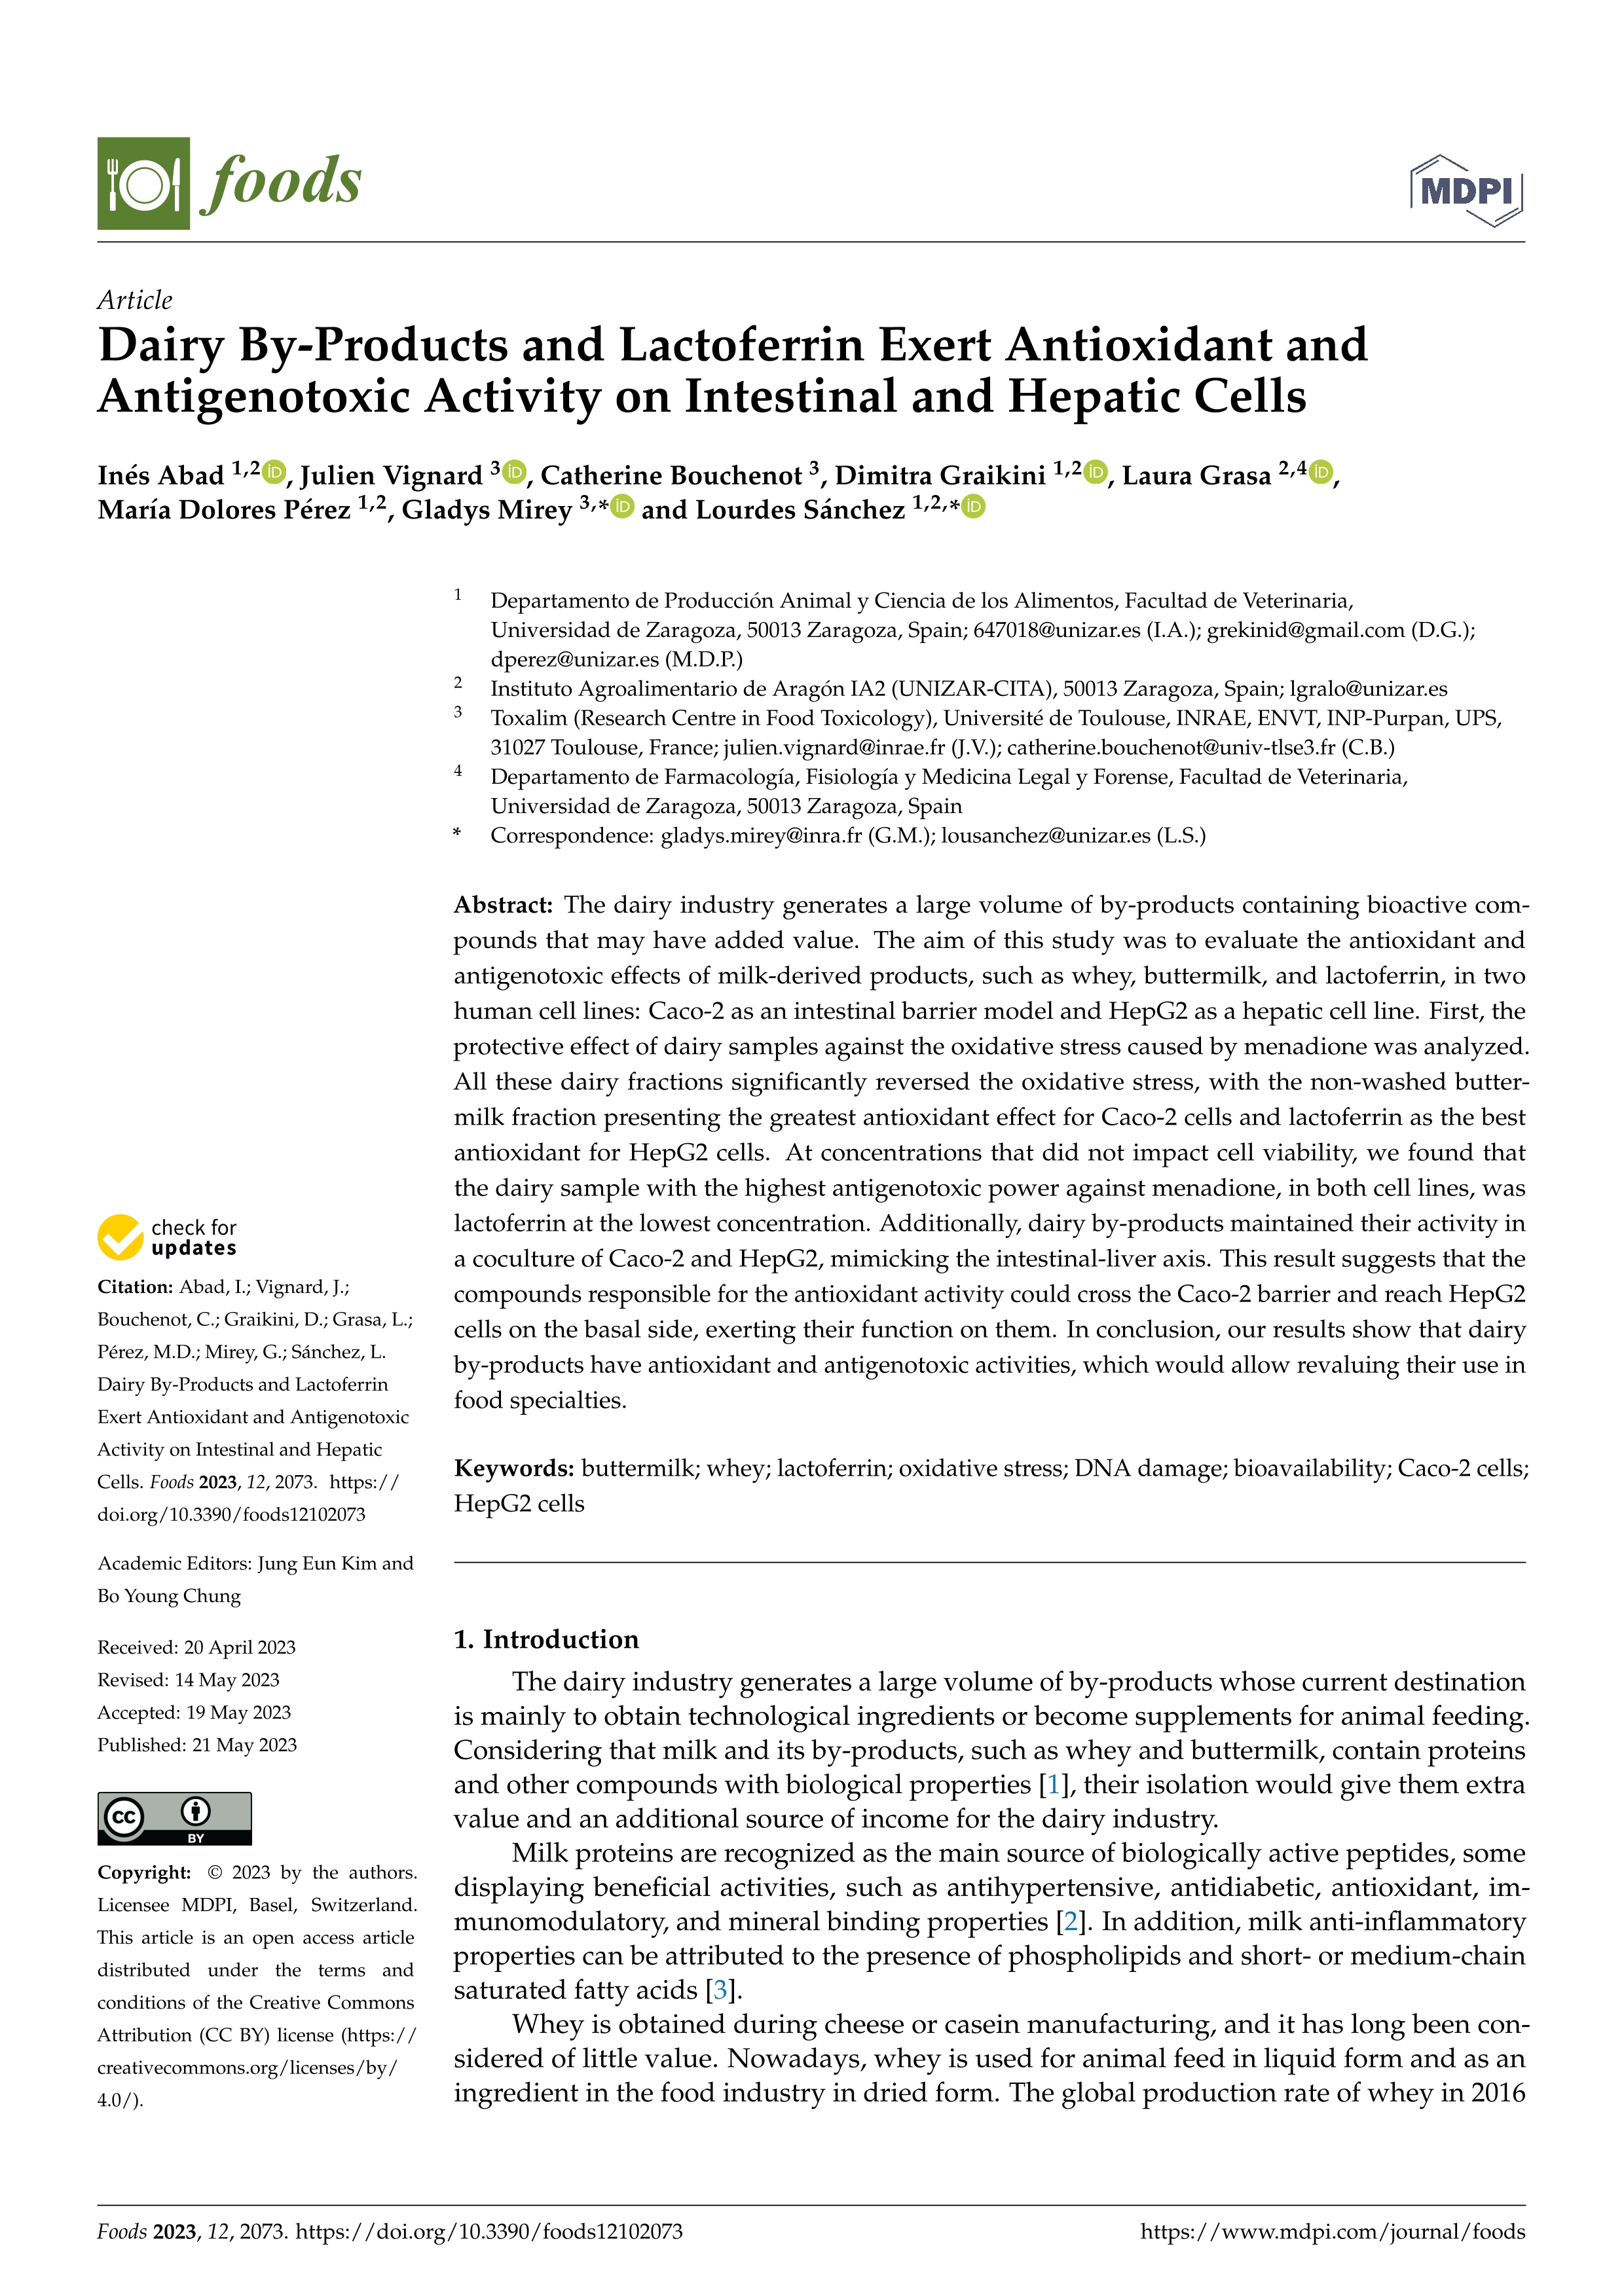 Dairy by-products and Lactoferrin exert antioxidant and antigenotoxic activity on intestinal and hepatic cells